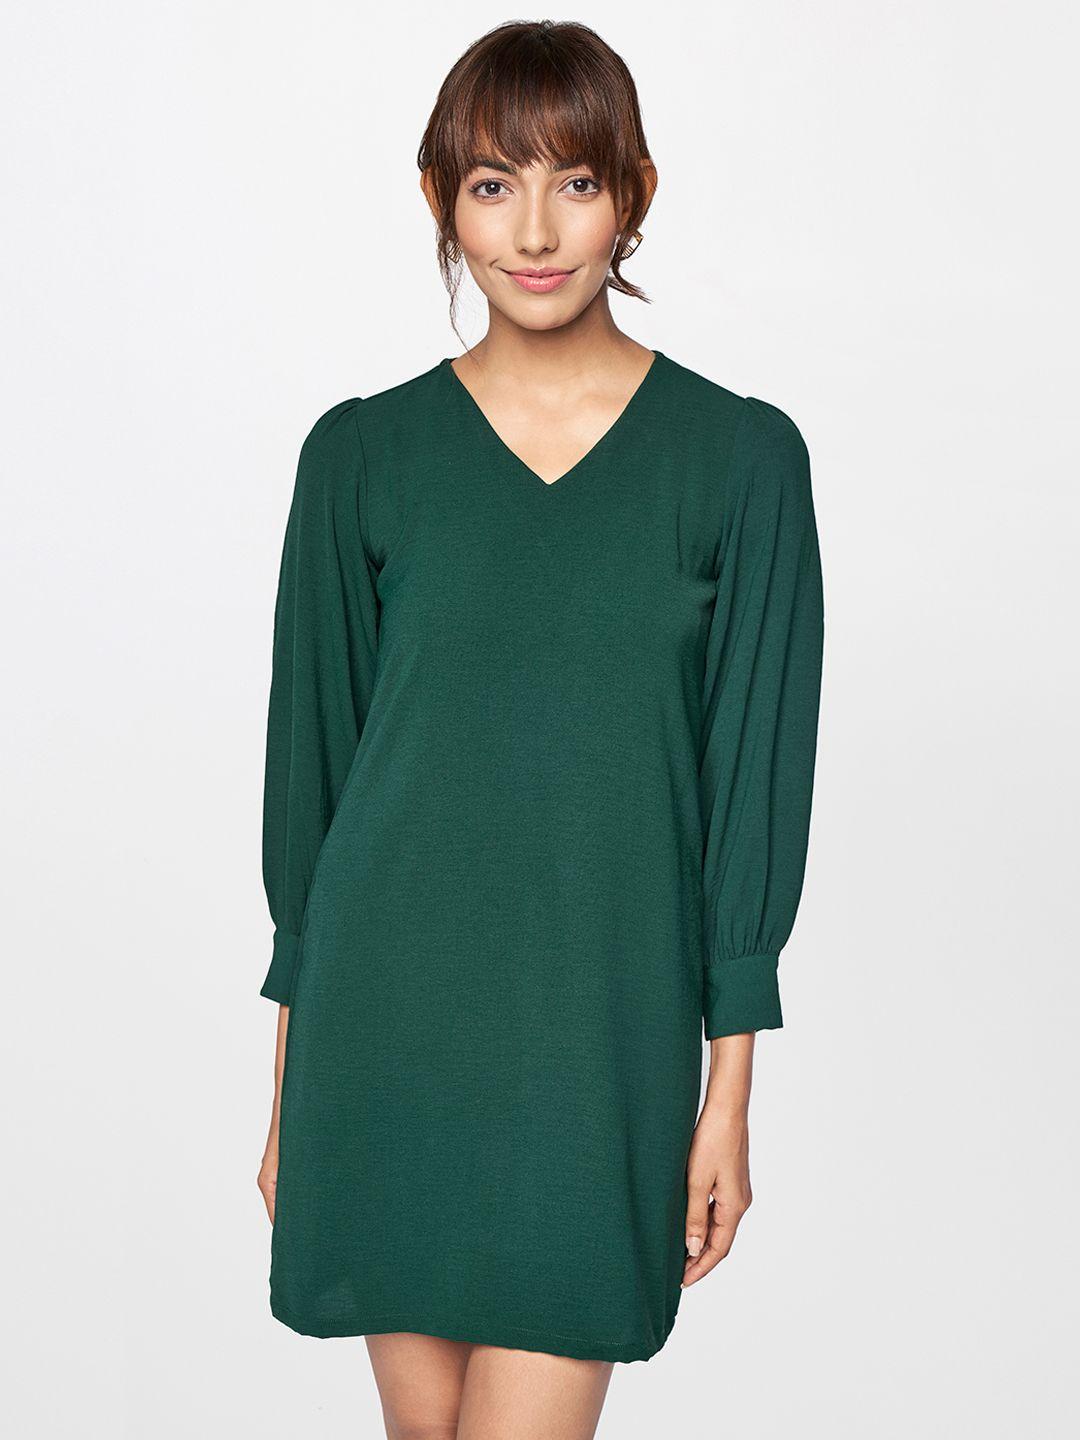 and-women-dark-green-solid-v-neck-casual-t-shirt-dress